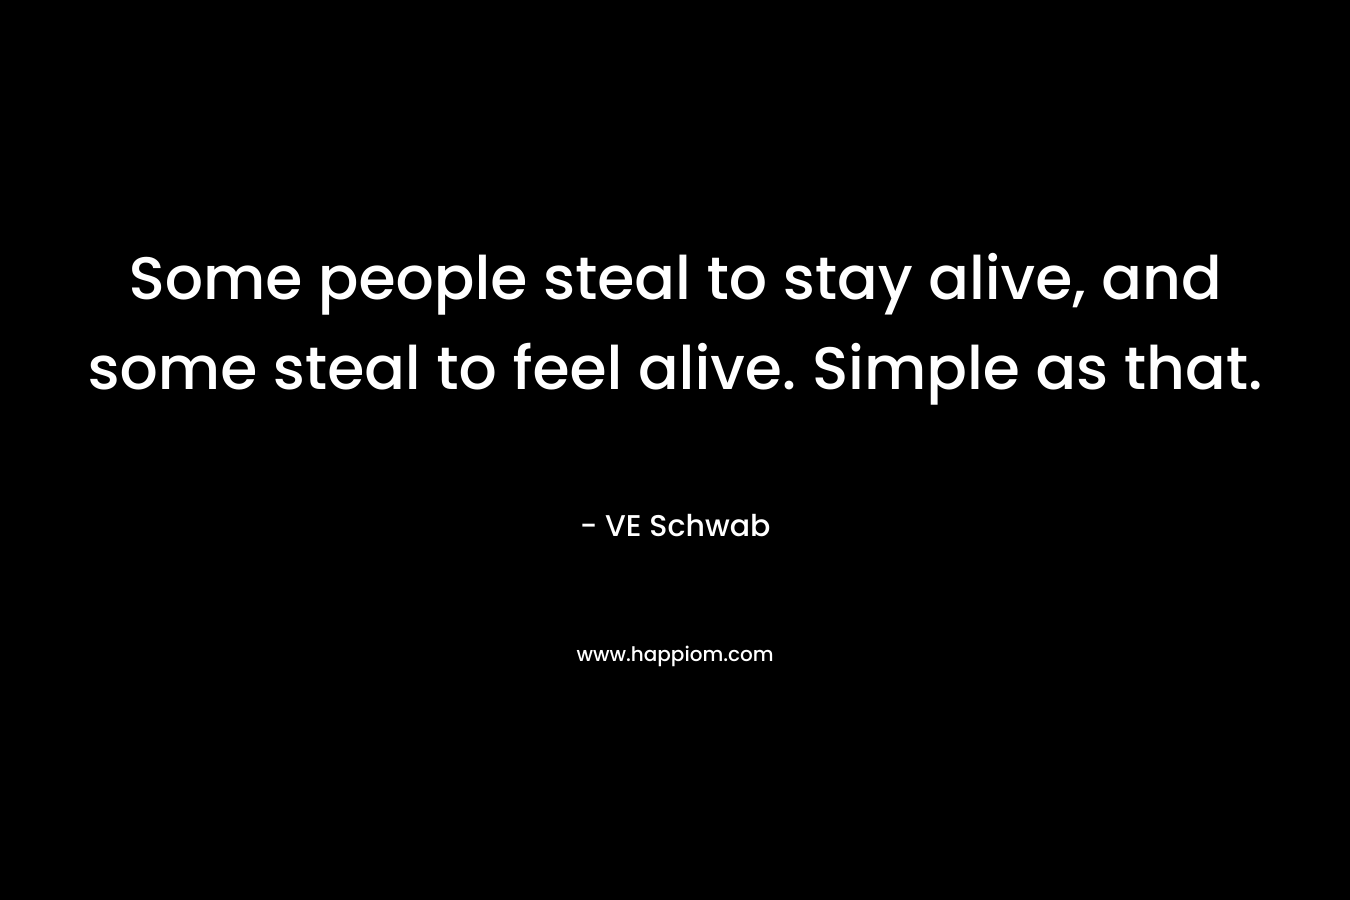 Some people steal to stay alive, and some steal to feel alive. Simple as that.